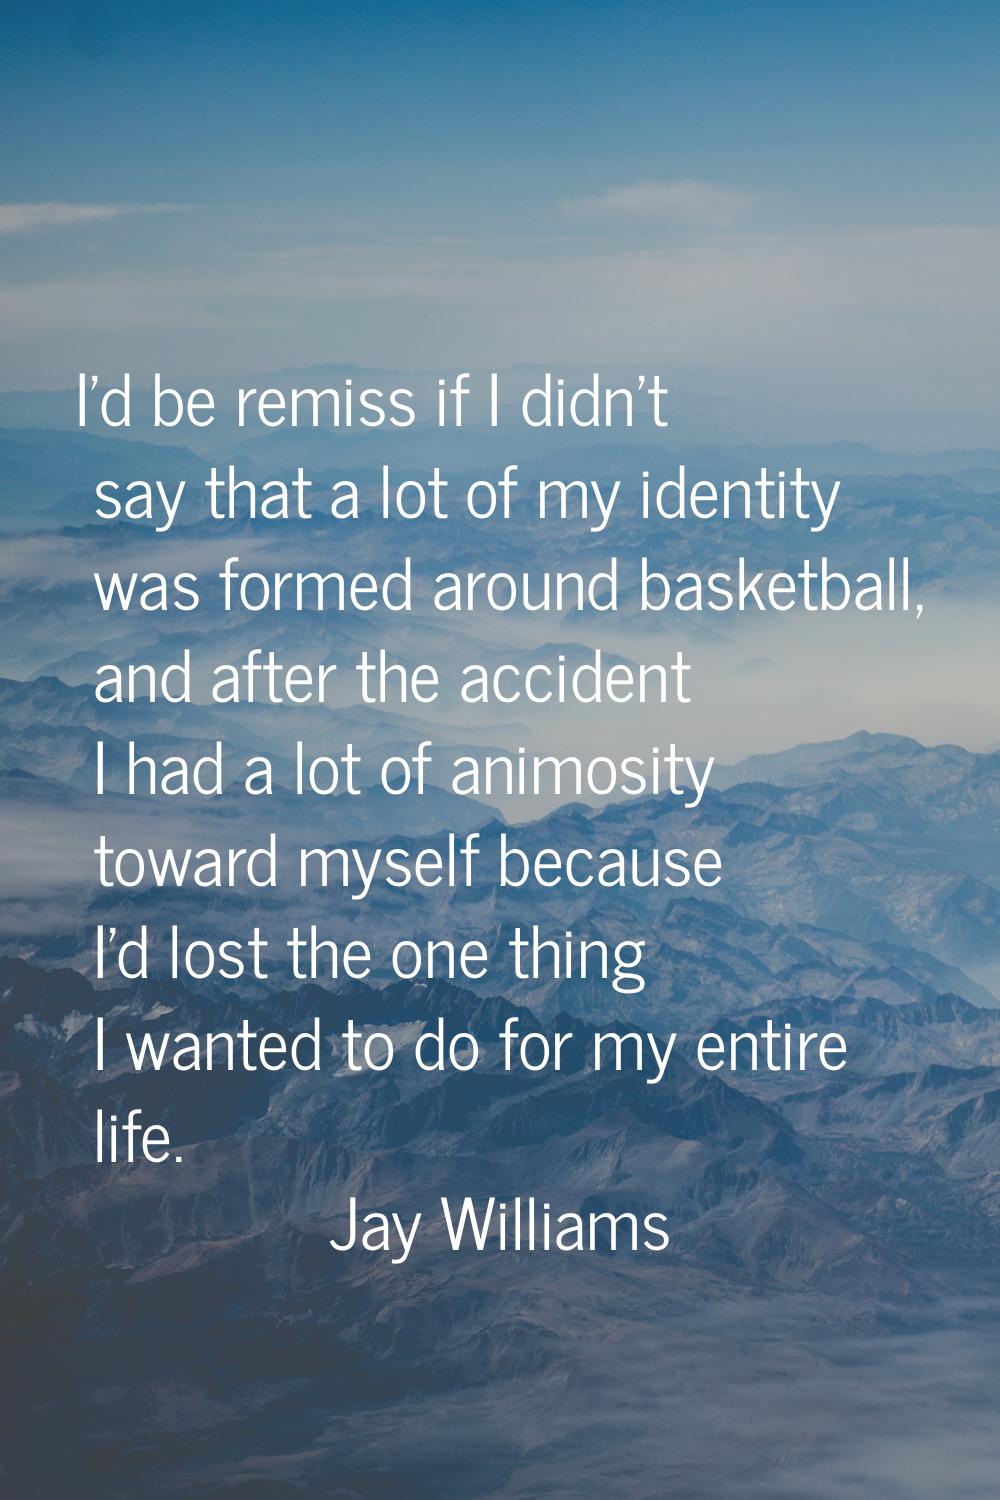 I'd be remiss if I didn't say that a lot of my identity was formed around basketball, and after the